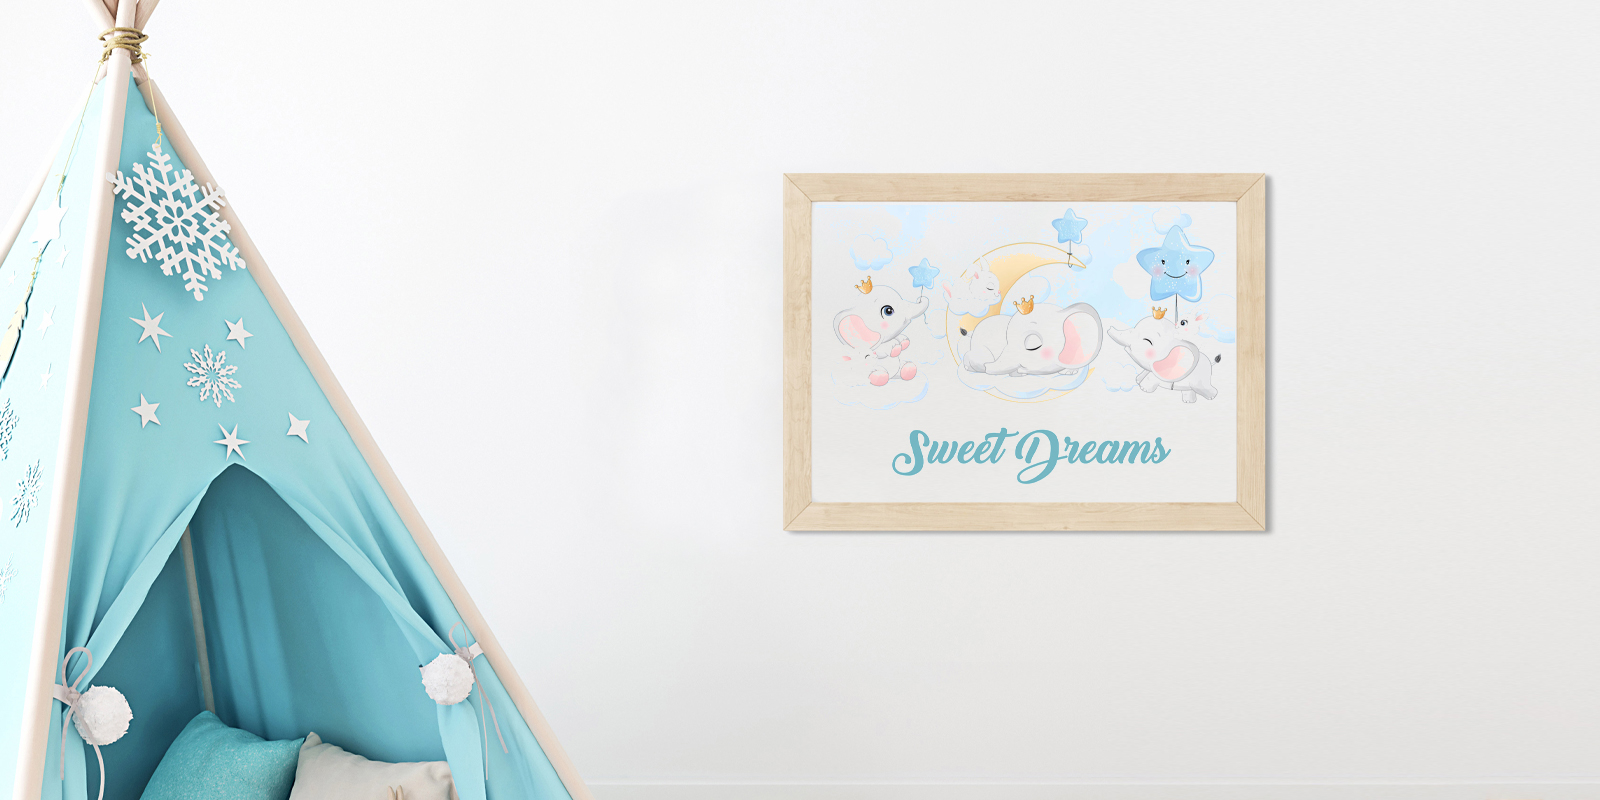 Baby prints in Toowoomba - Print with Pagerr